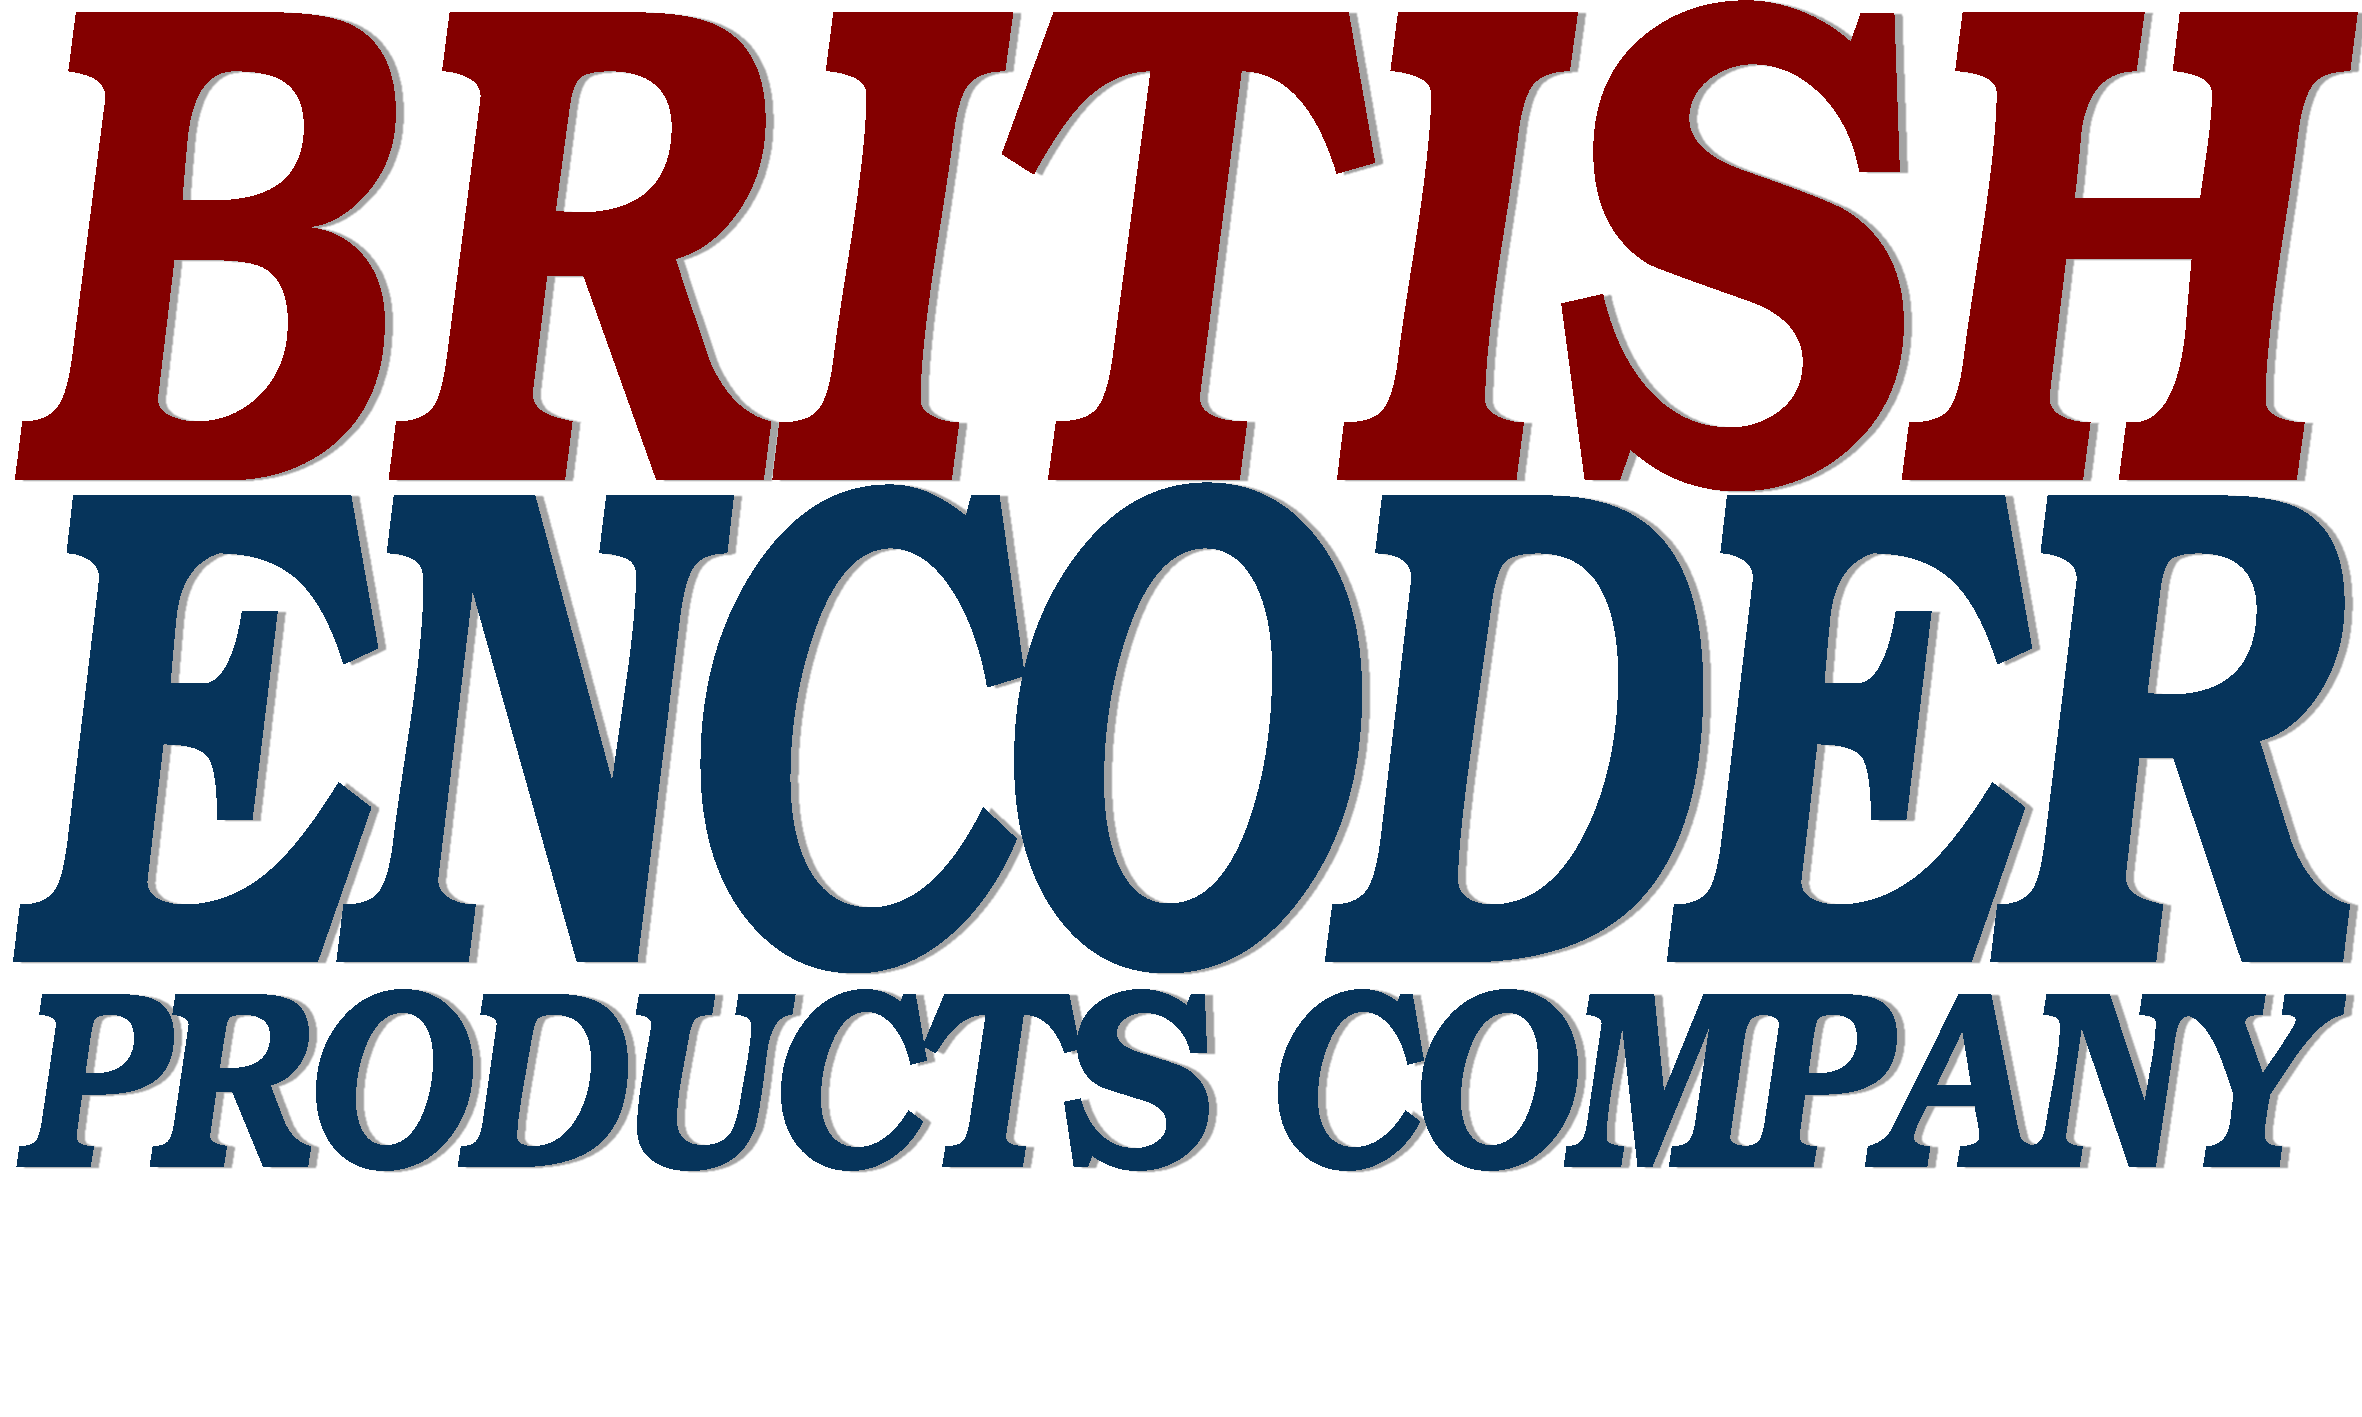 British Encoder Products Co